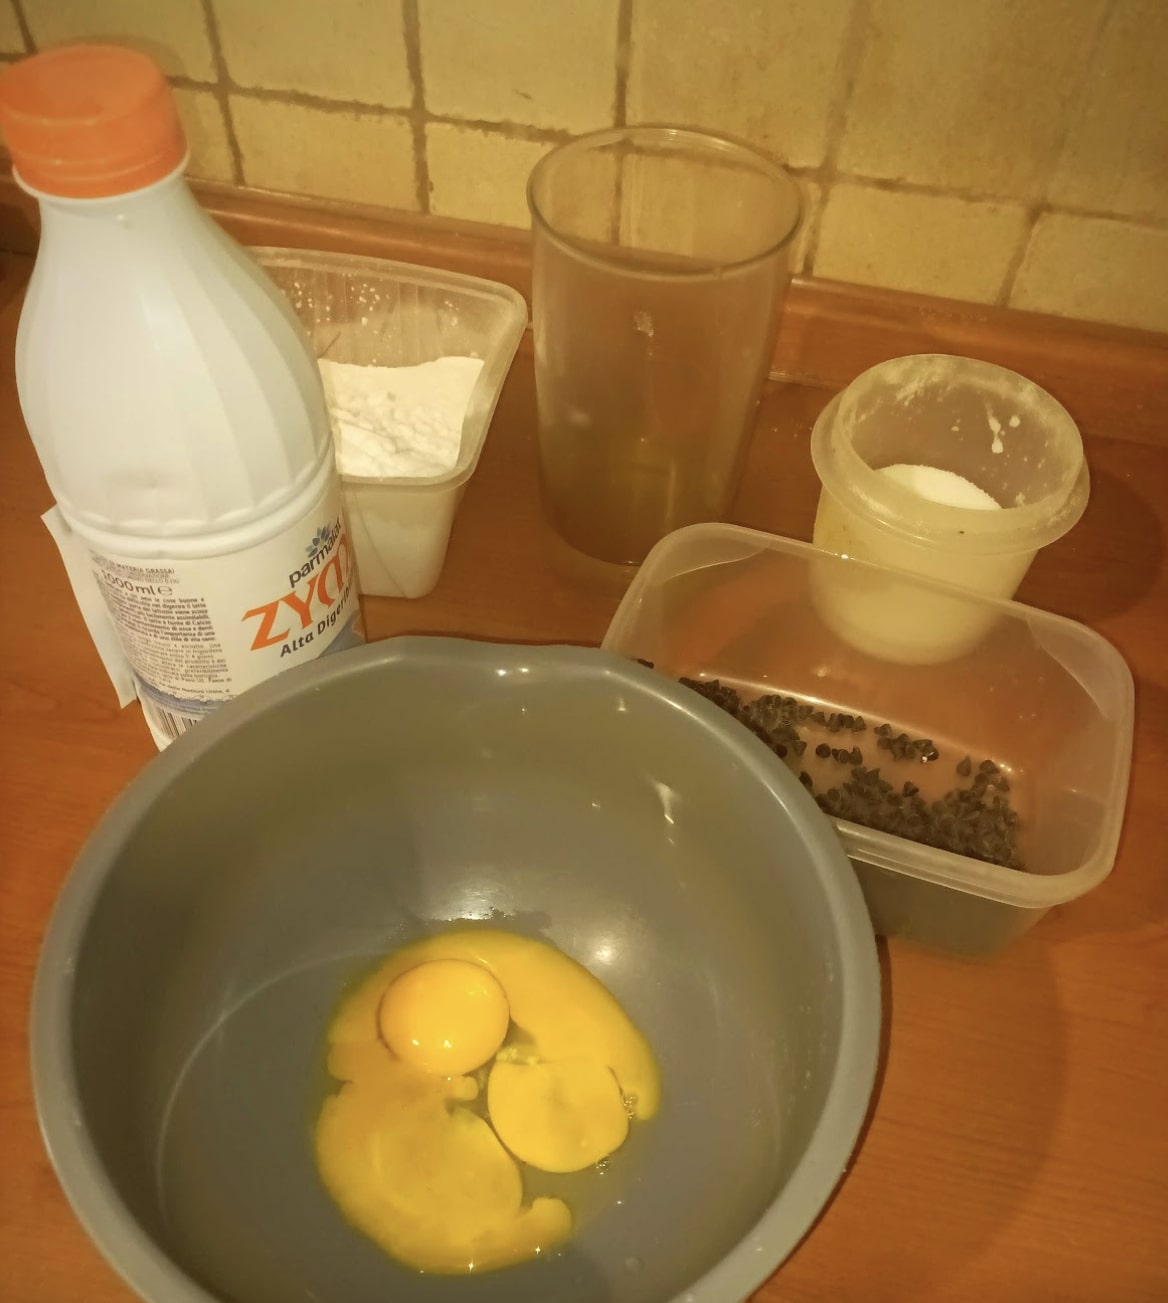 the ingredients for this gluten free cookies recipe, arranged on a table